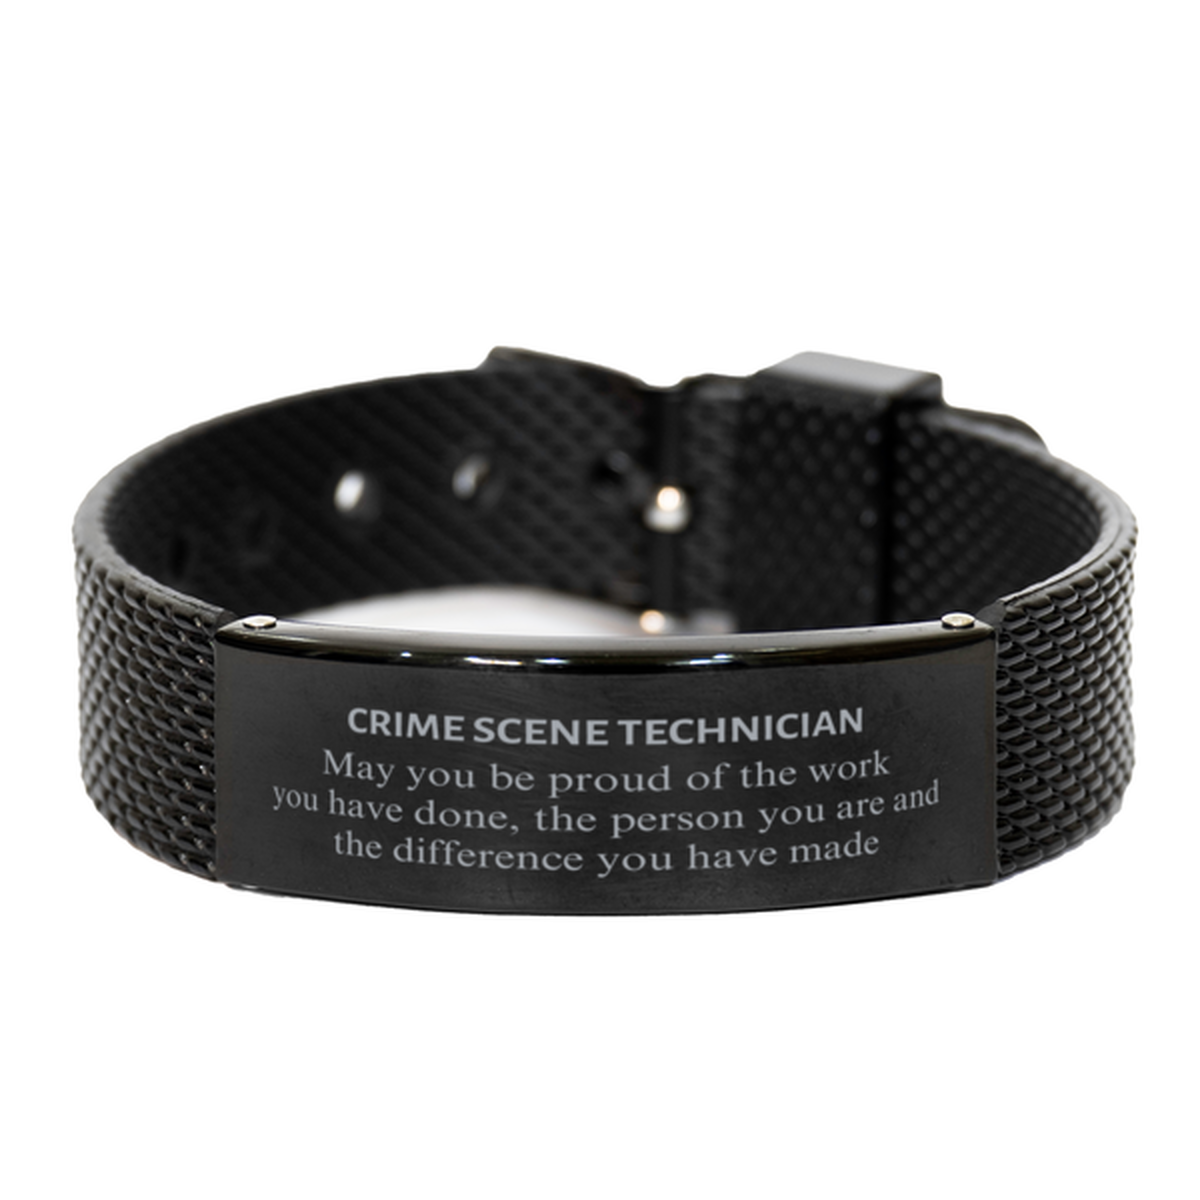 Crime Scene Technician May you be proud of the work you have done, Retirement Crime Scene Technician Black Shark Mesh Bracelet for Colleague Appreciation Gifts Amazing for Crime Scene Technician